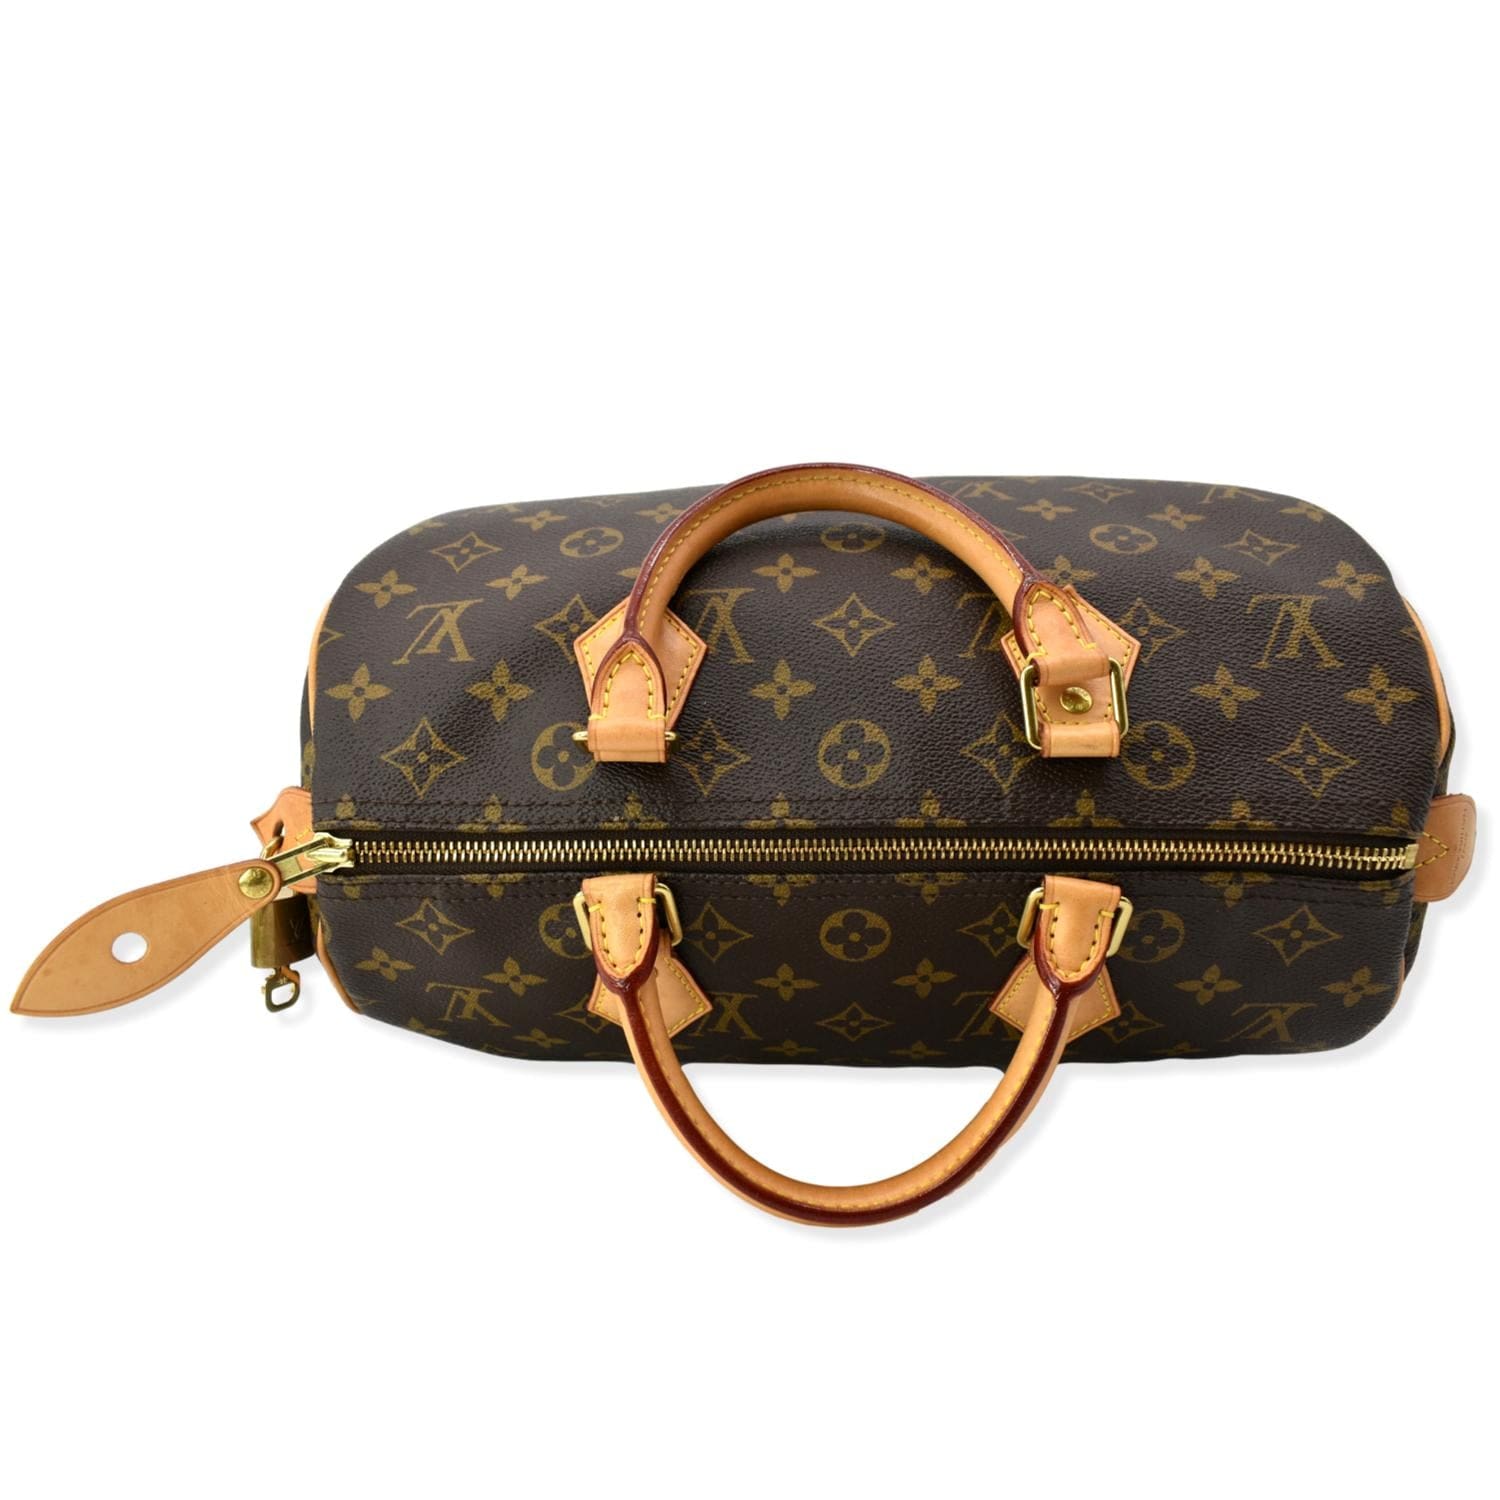 authenticate louis vuitton by andy haffle - Issuu